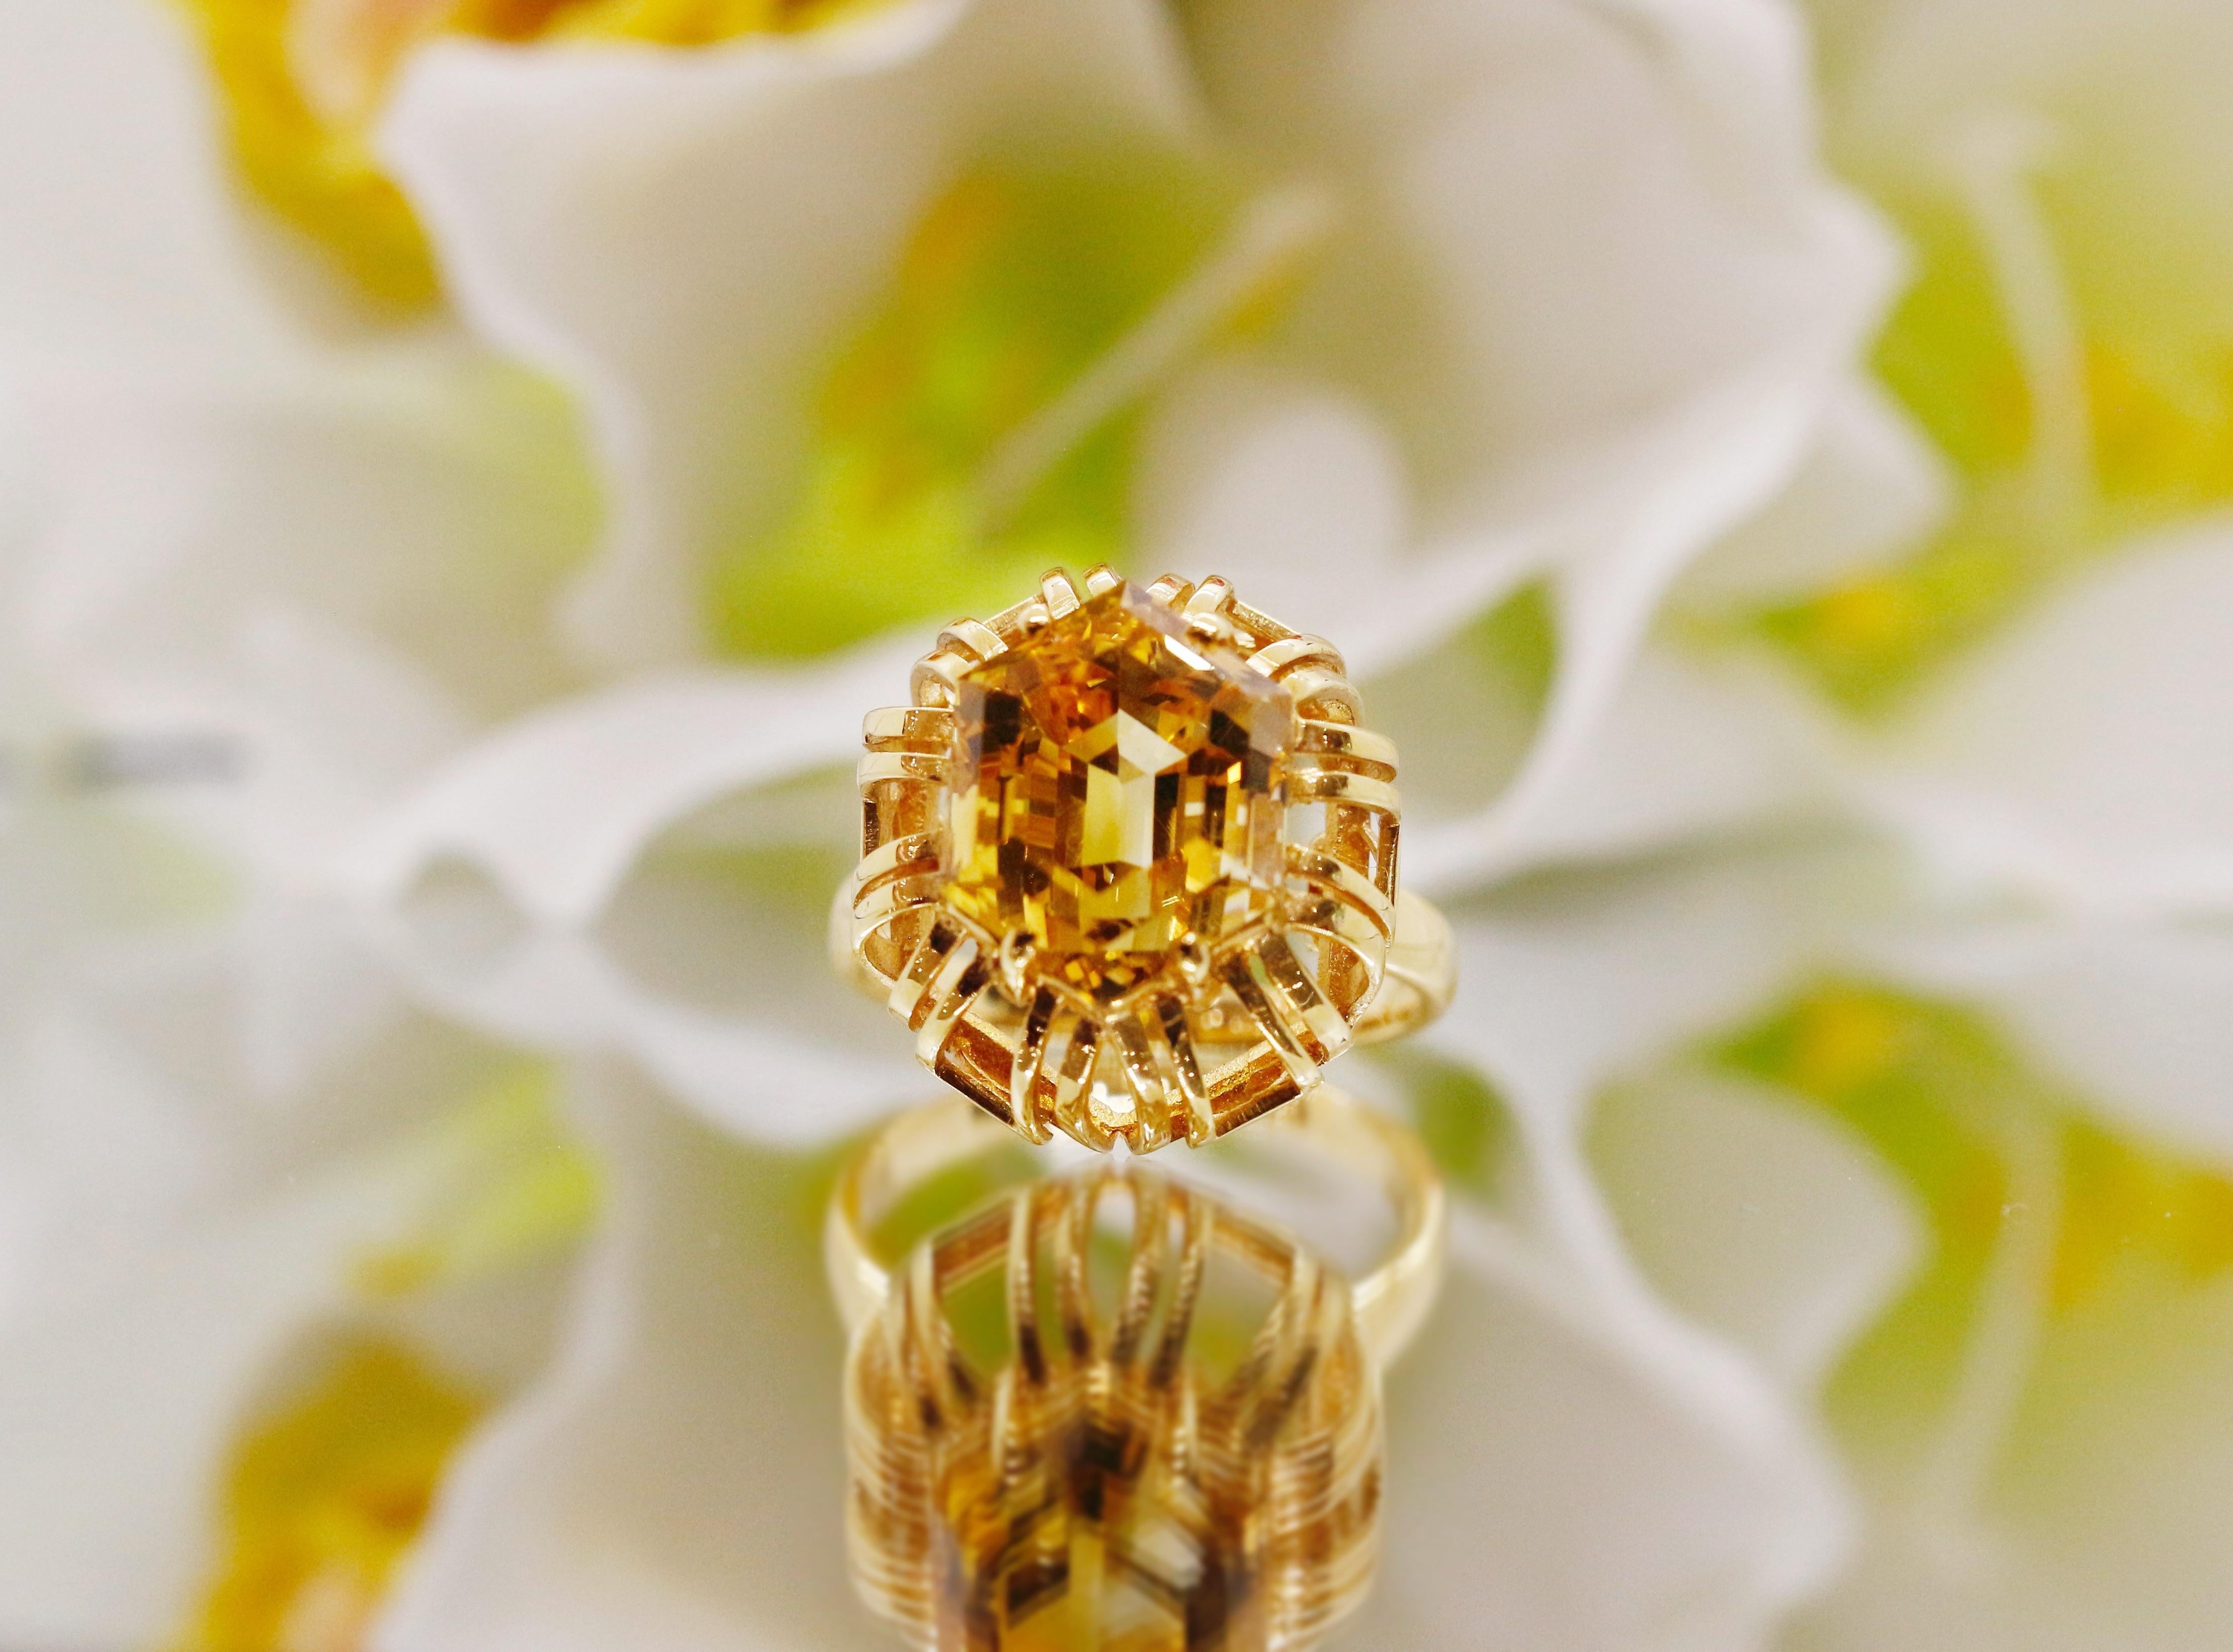 Citrine Ring Etsy 18kt Solid gold  Citrine Floral Rings  Artisan Citrine Ring  Yellow Gemstone Ring  Wedding Ring  Bridesmaid Ring

◆Solid 18kt Gold(shown in picture)

◆Citrine Weight: 10 CT

◆Total Weight: 5.9 Gram